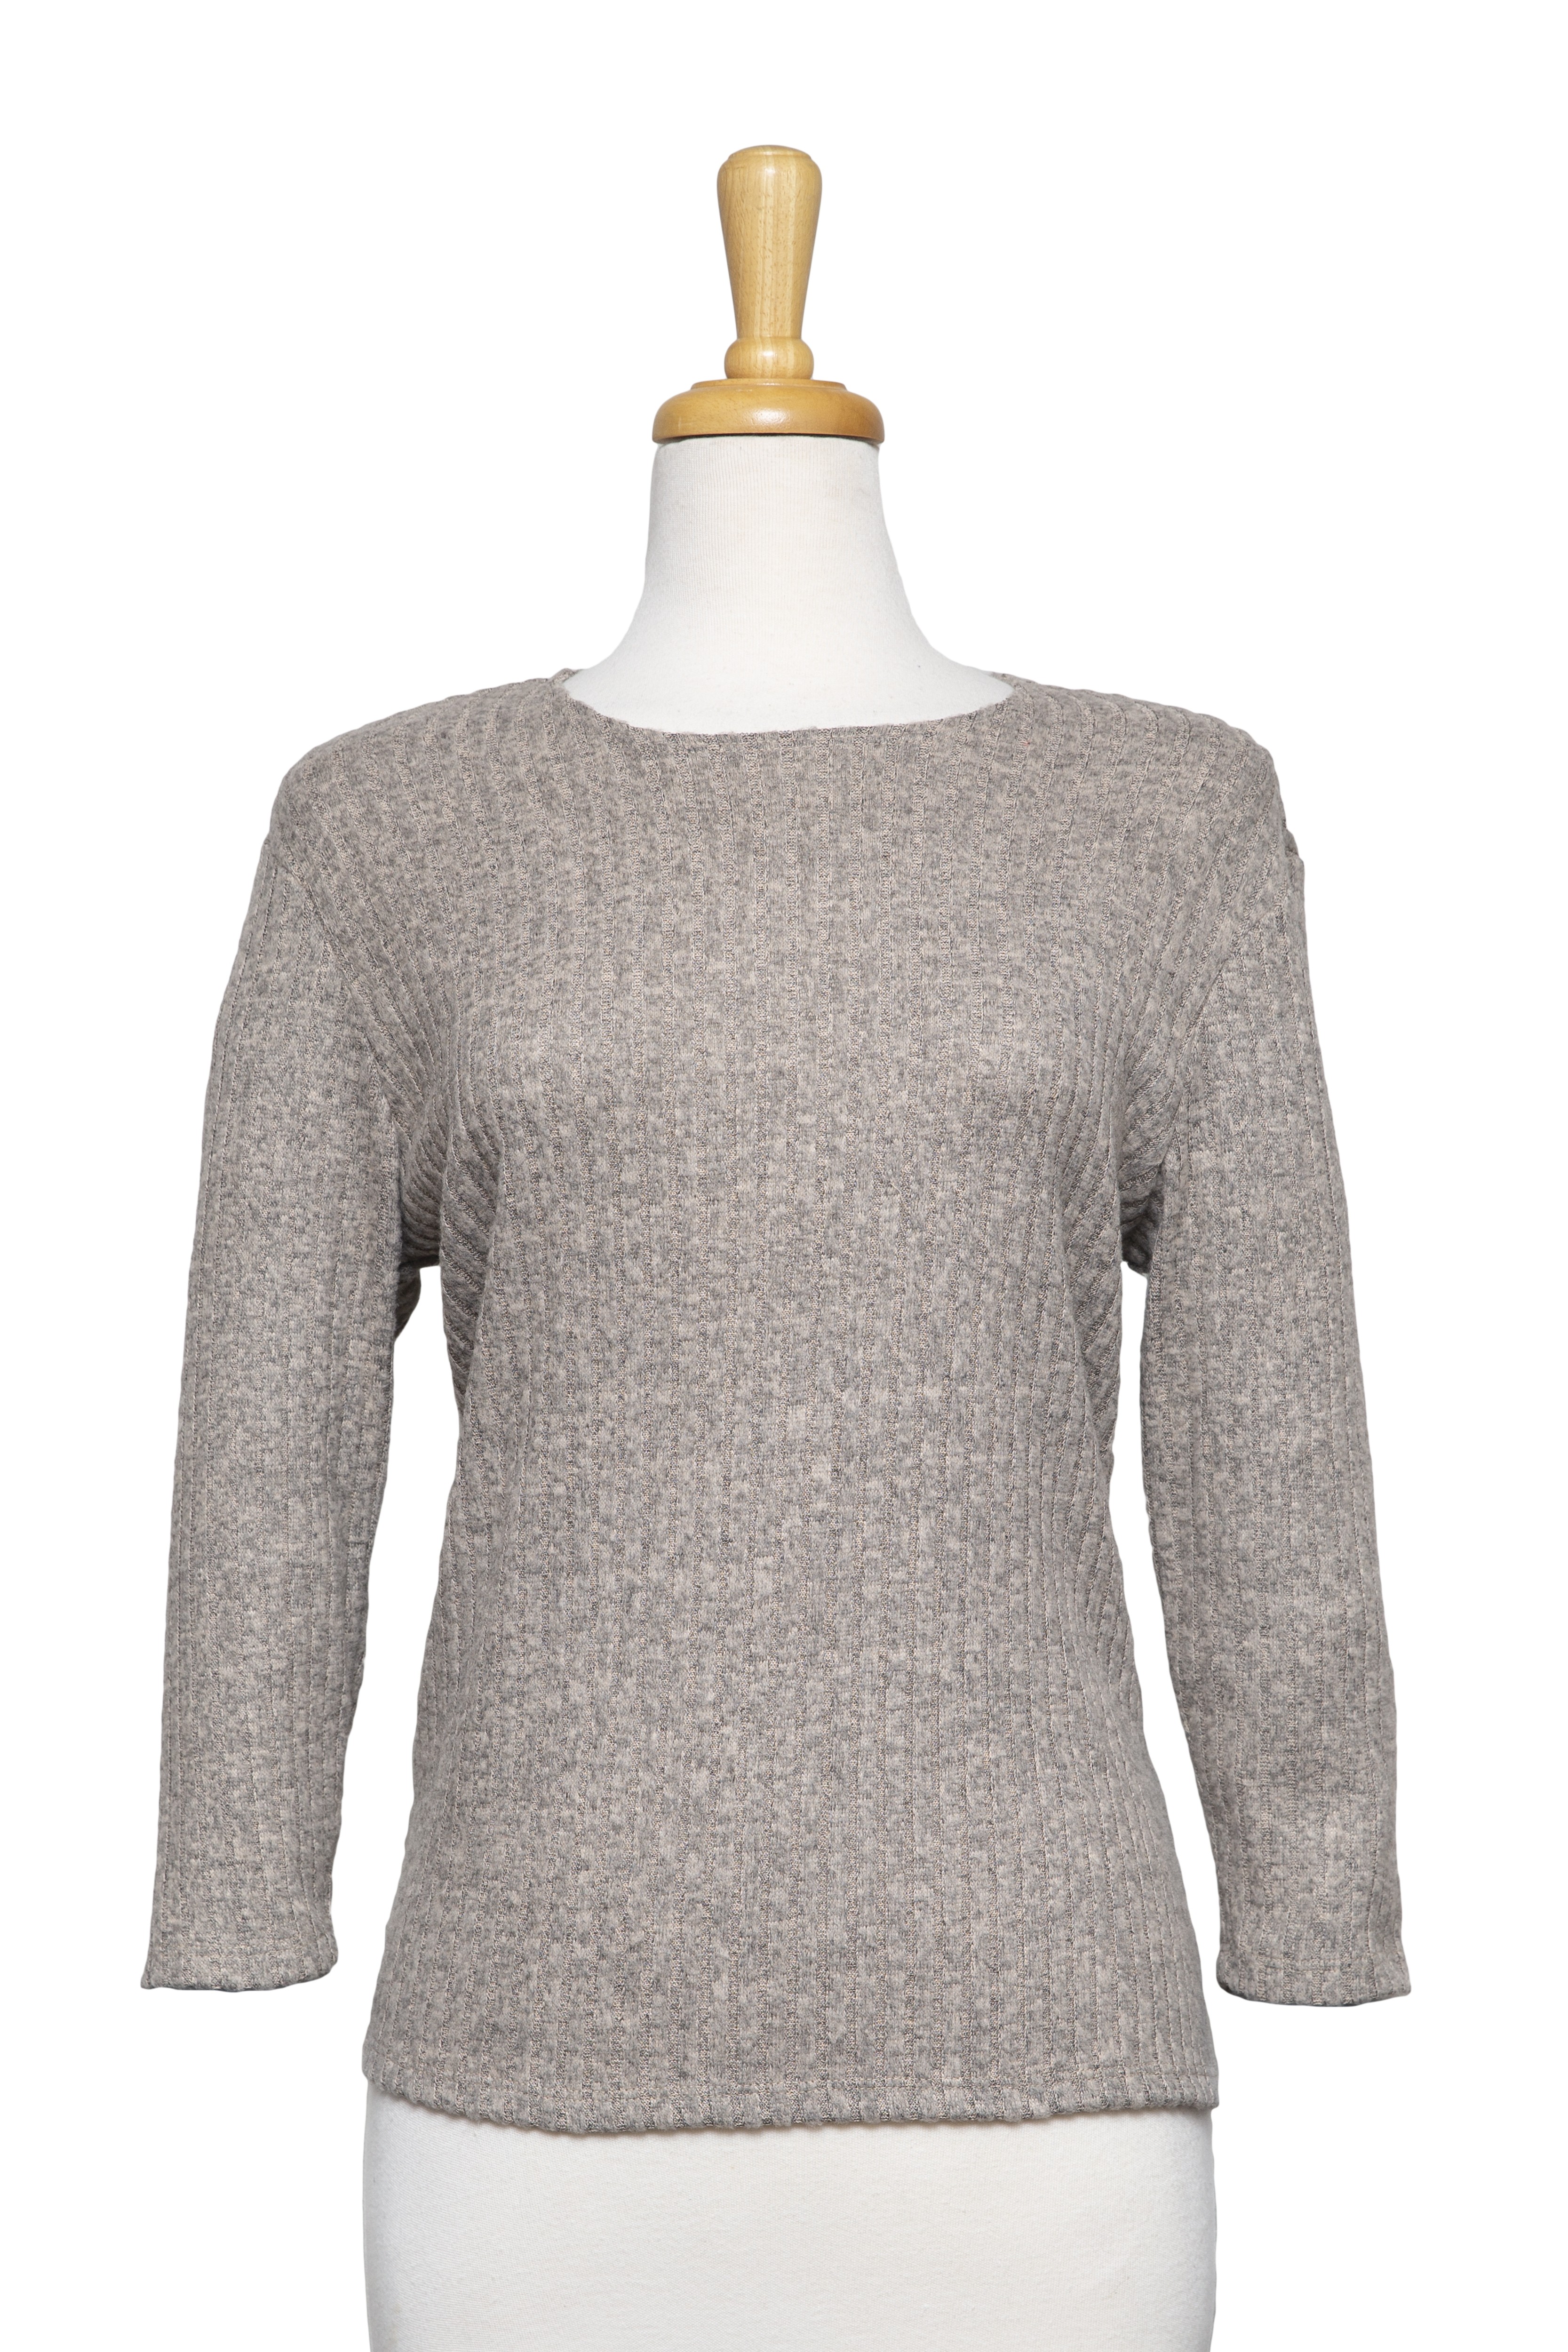 Heather Tan Ribbed 3/4 Sleeves Knit Top